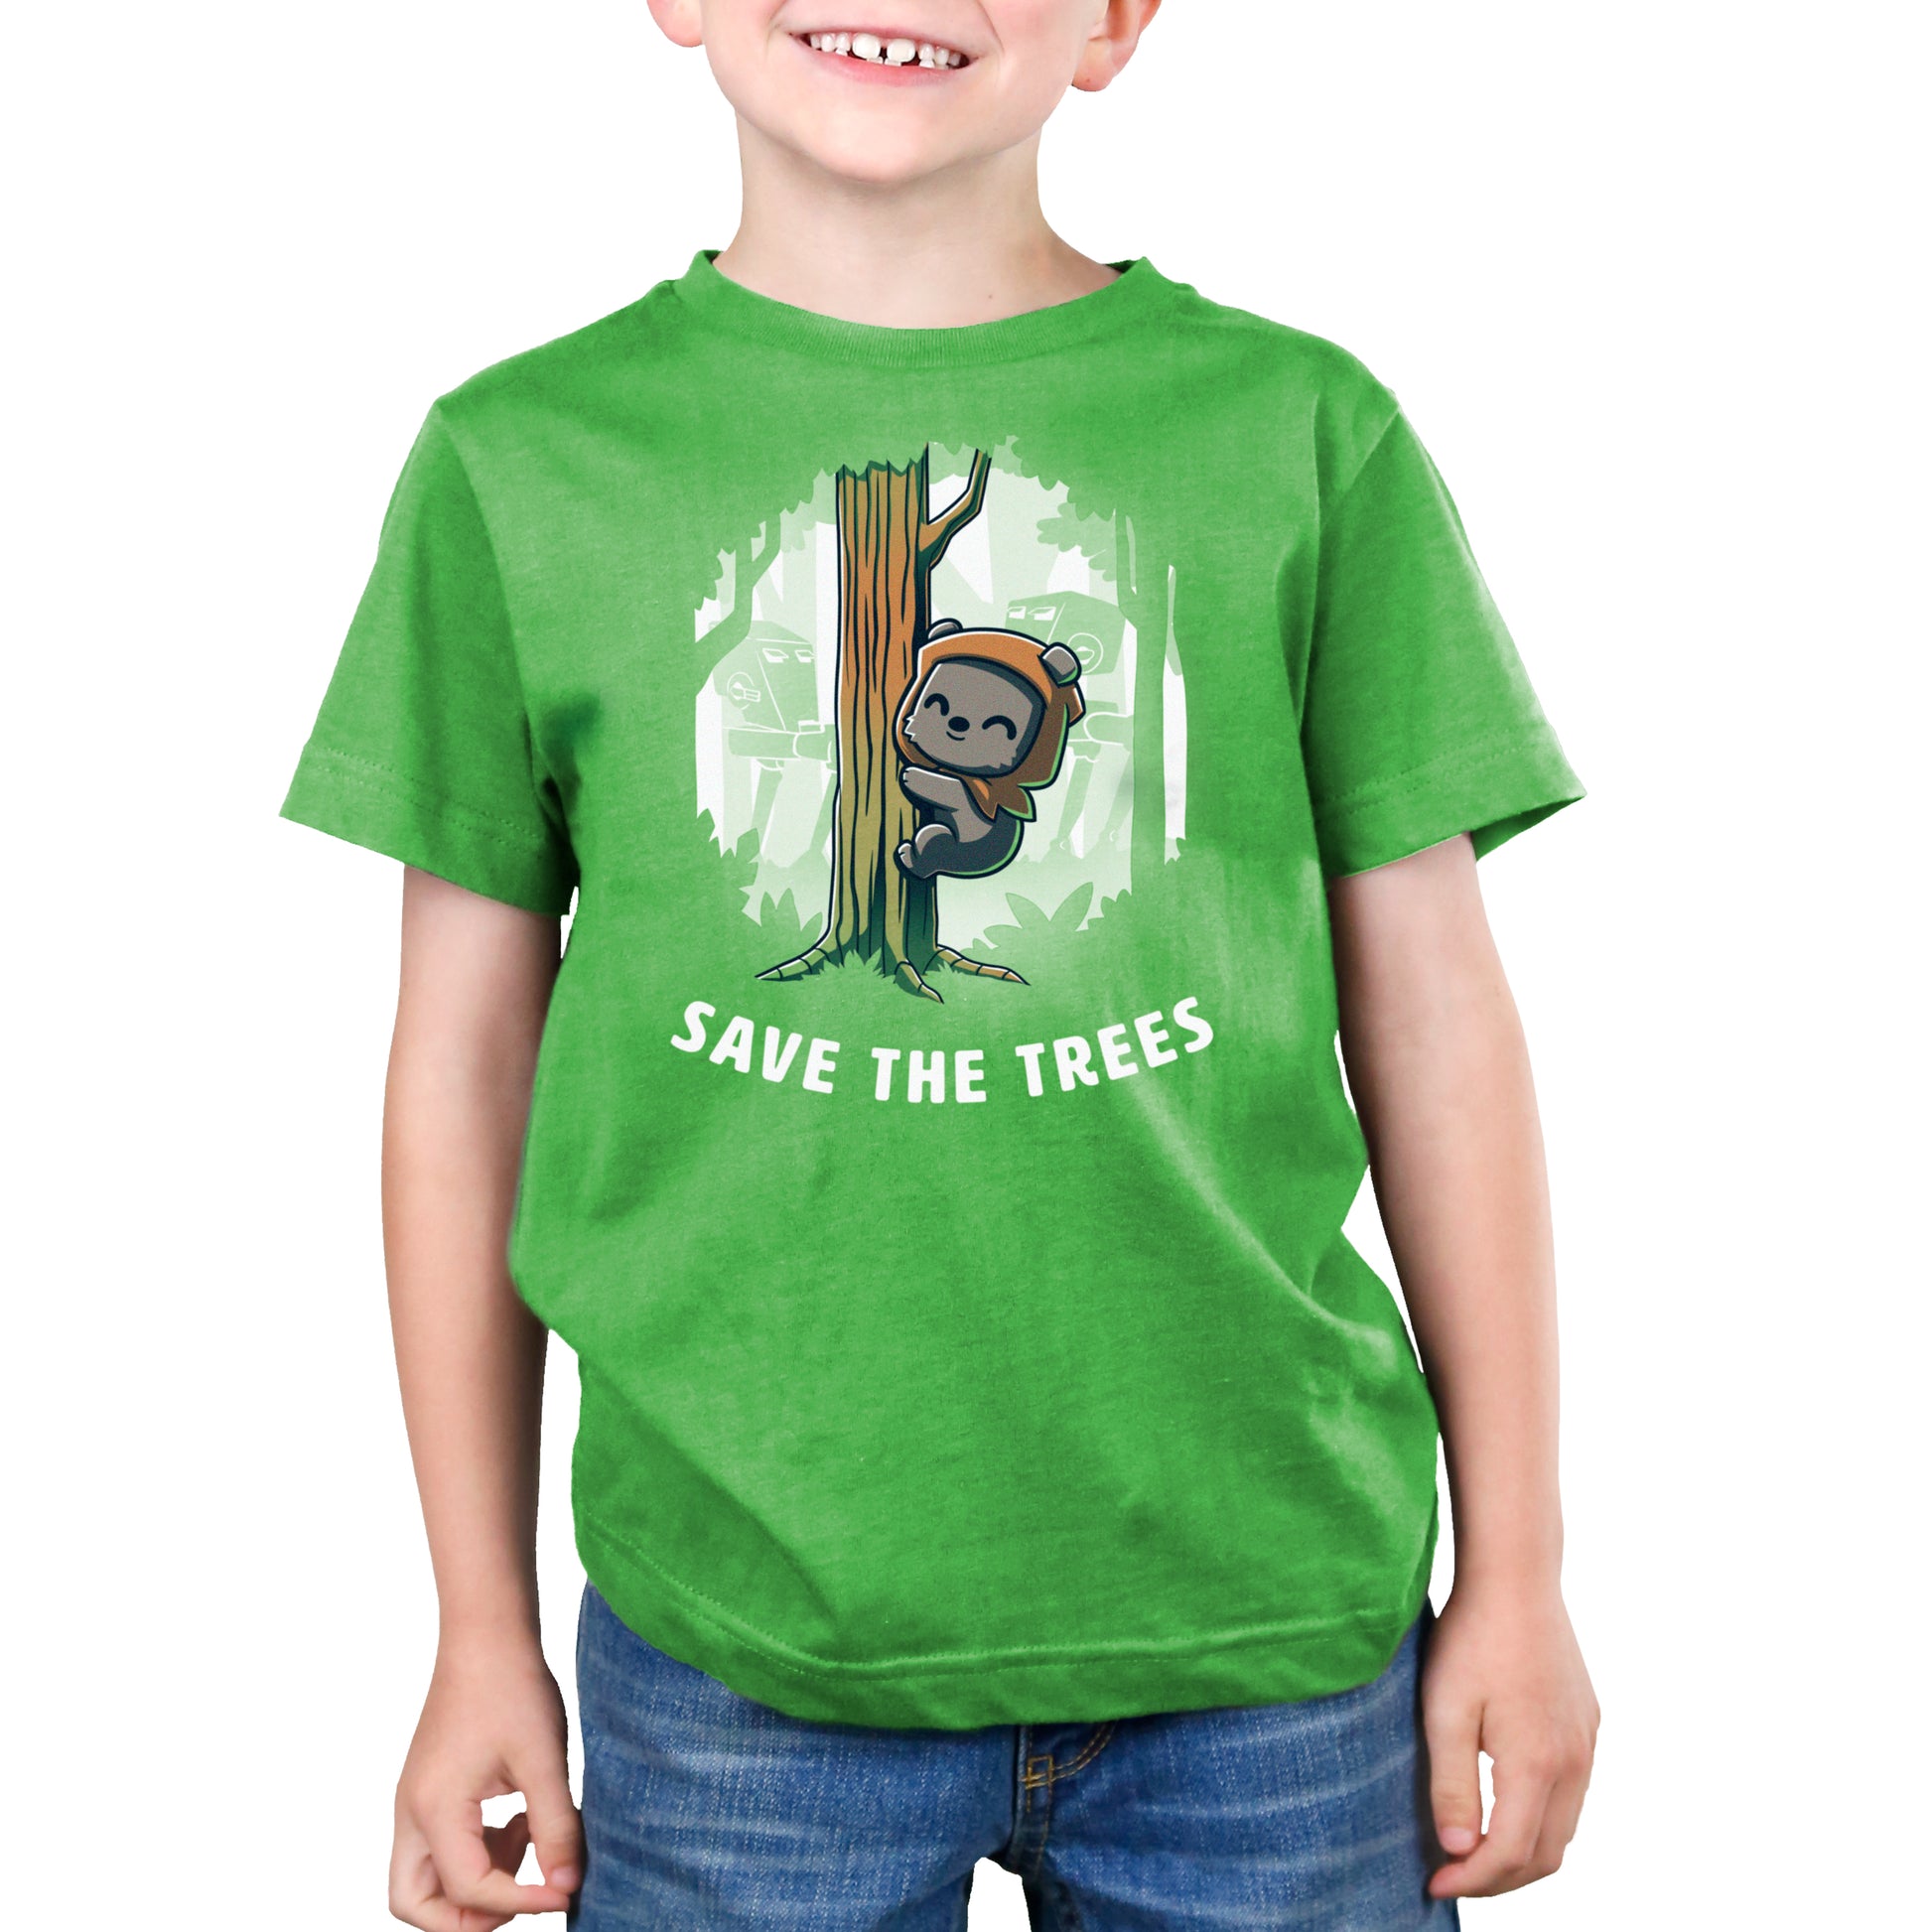 A young boy wearing a green Star Wars Save the Trees t-shirt.